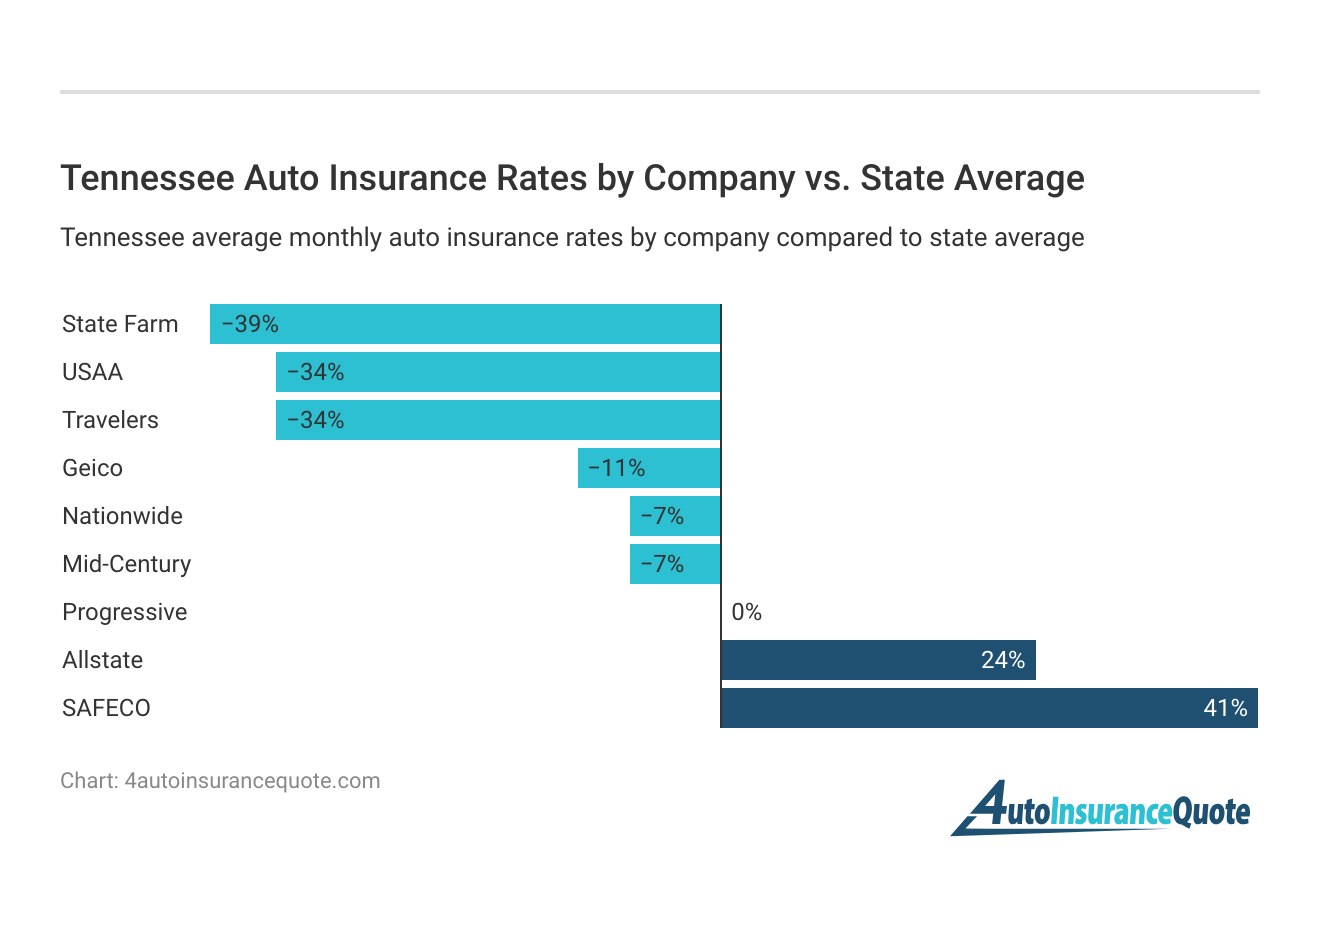 <h3>Tennessee Auto Insurance Rates by Company vs. State Average</h3>